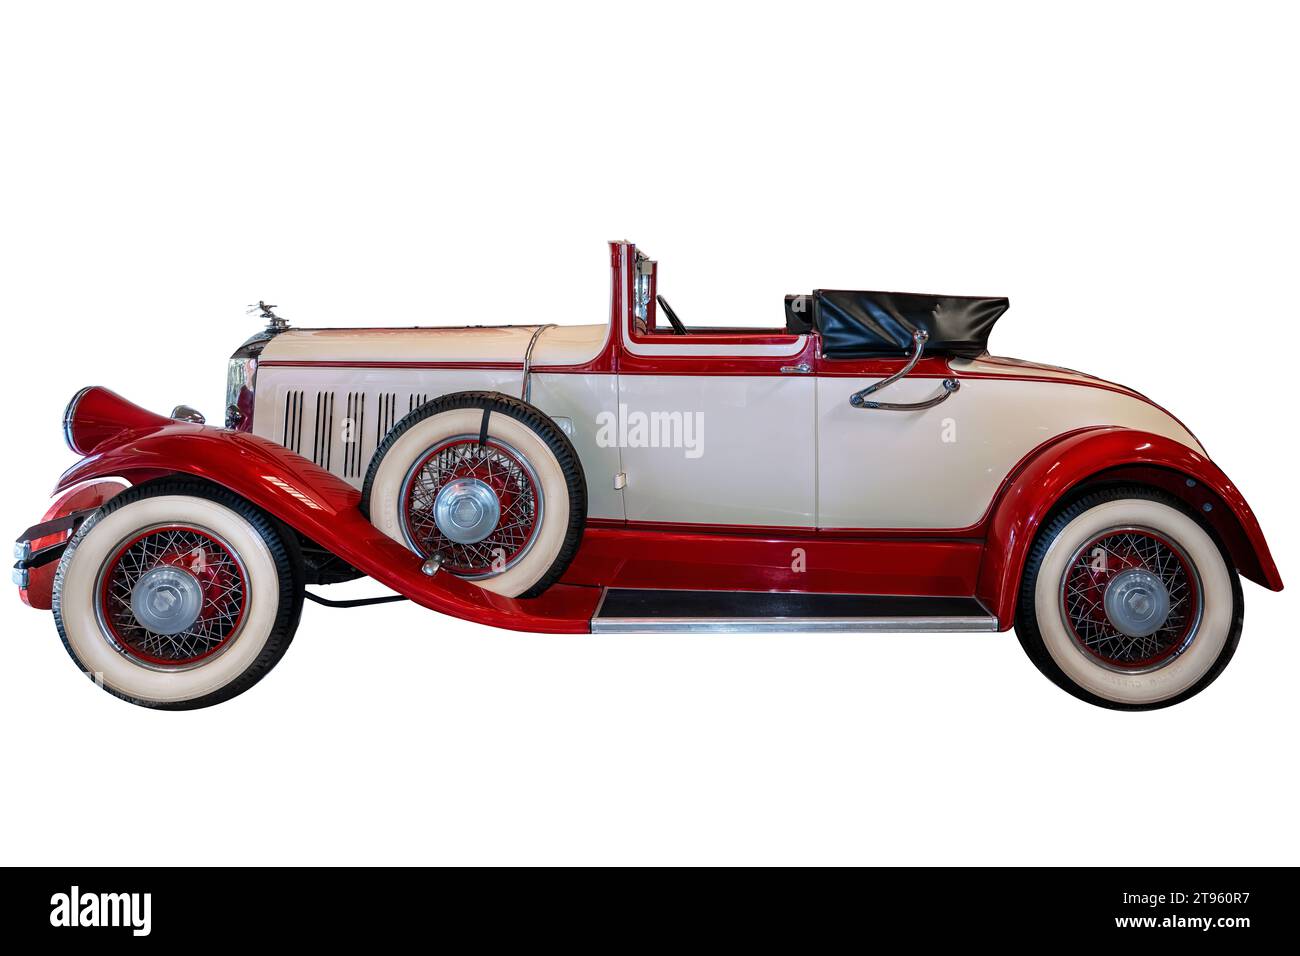 Escondido, CA - 10-30-2023: 1932 Pierce Arrow Model 54 Convertible Sedan. It used the company’s straight-eight engine which produced 125 bhp and conti Stock Photo